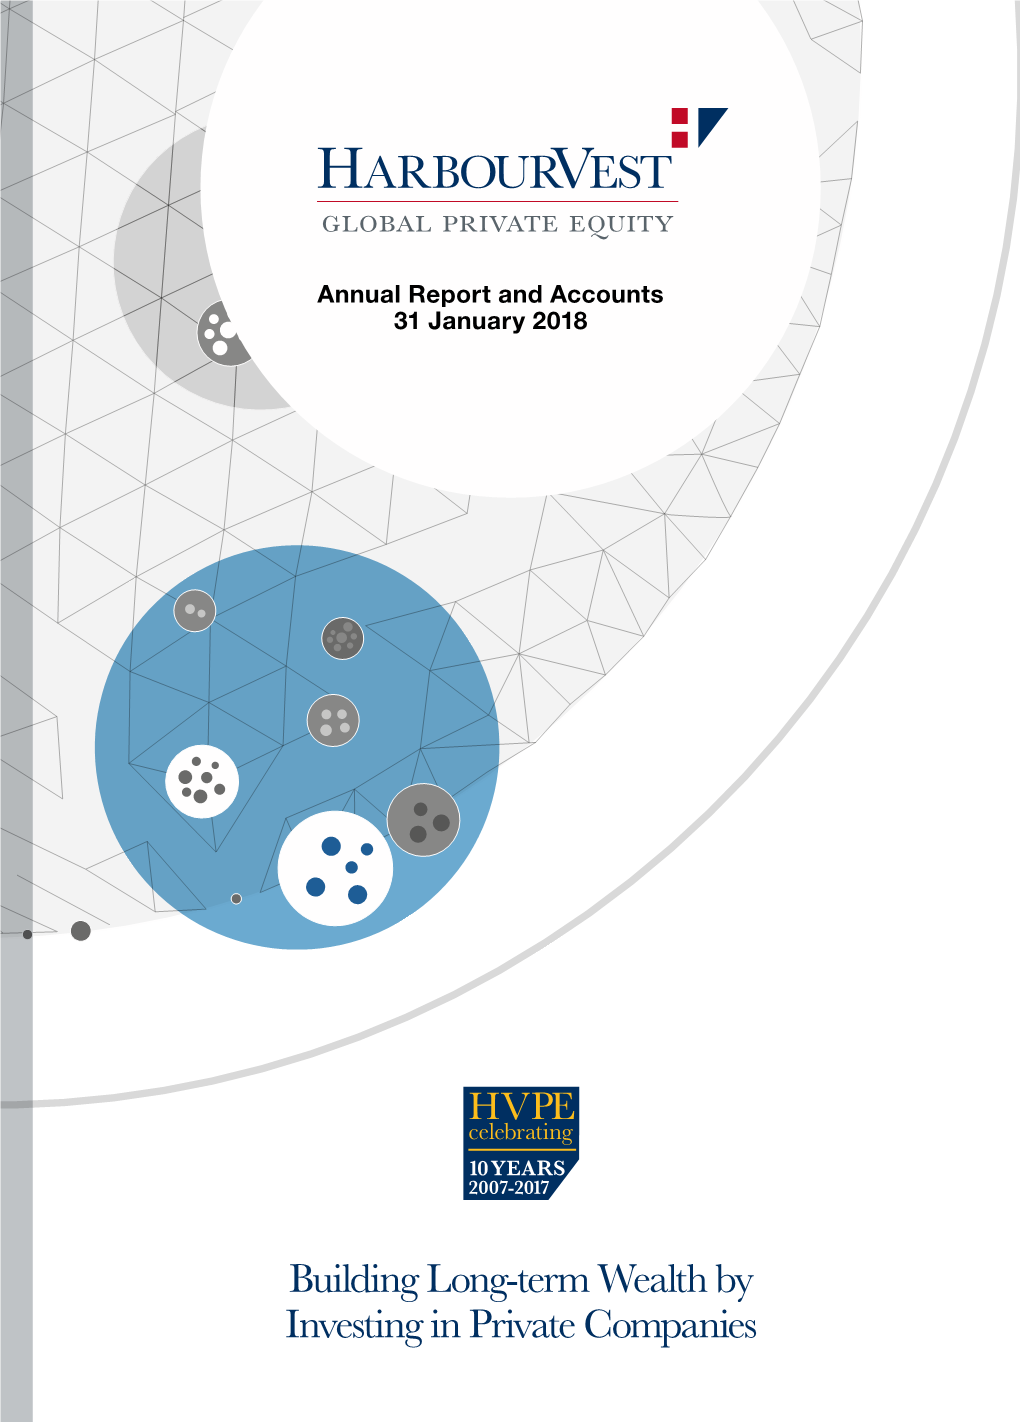 Annual Report and Accounts 2018 Accounts and Report Annual HVPE Annual Report and Accounts 31 January 2018